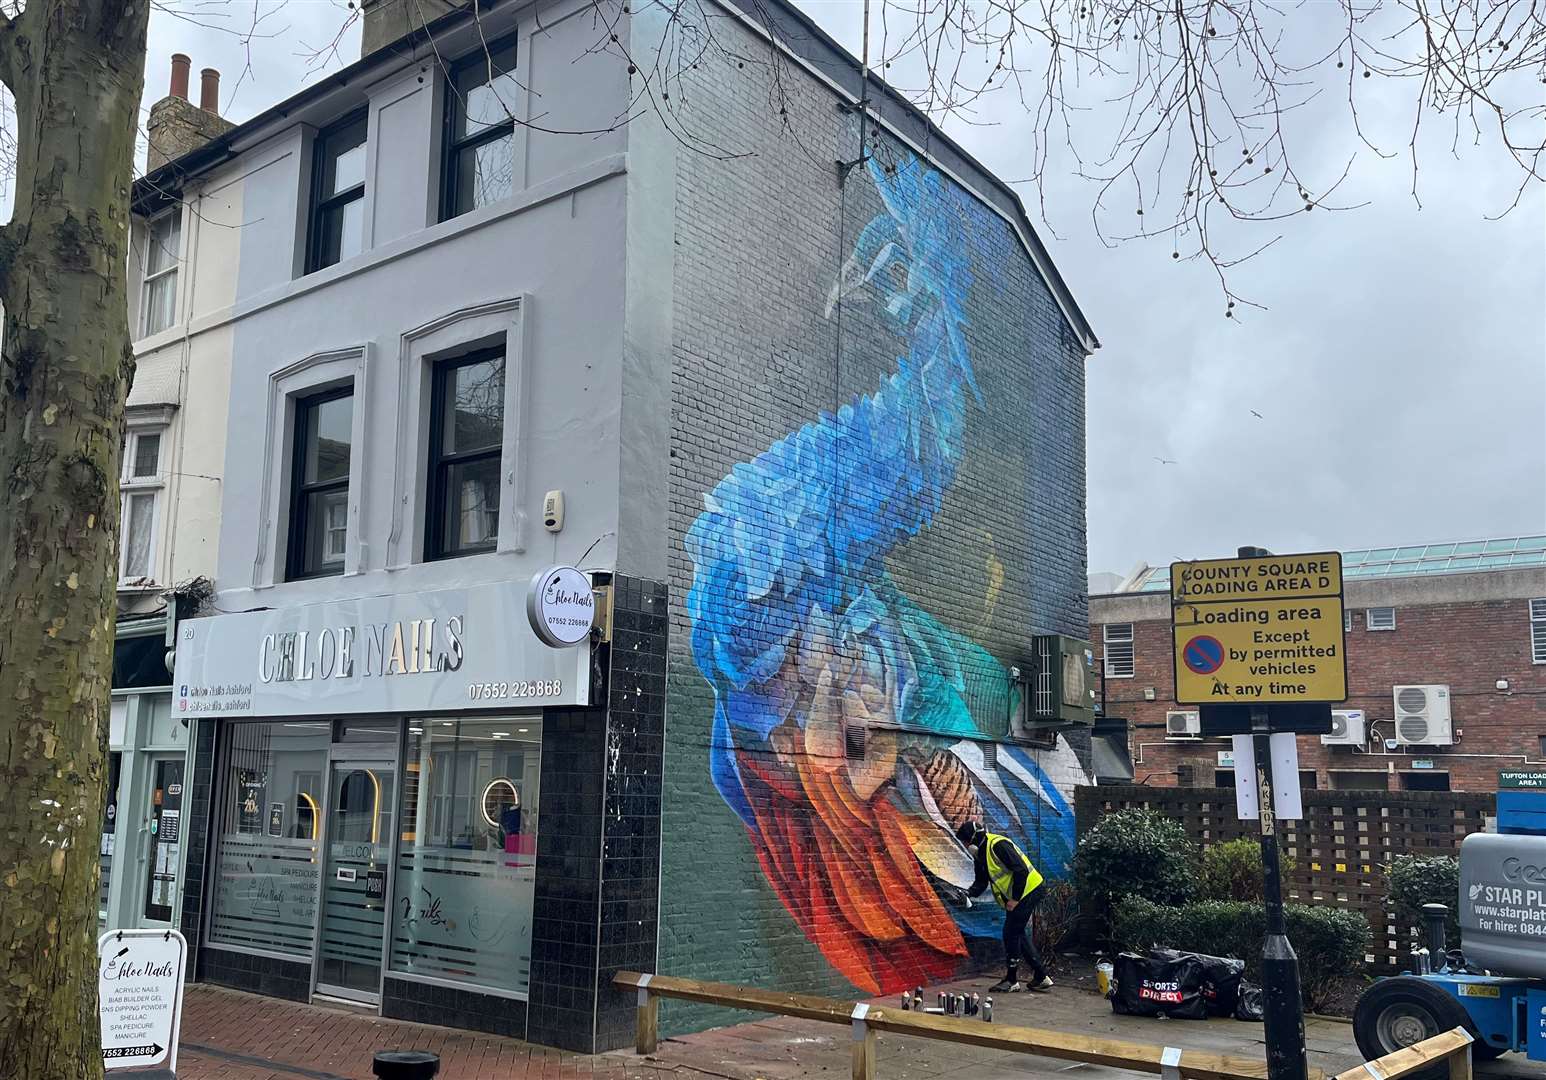 The mural is on a building which is home to a nail bar